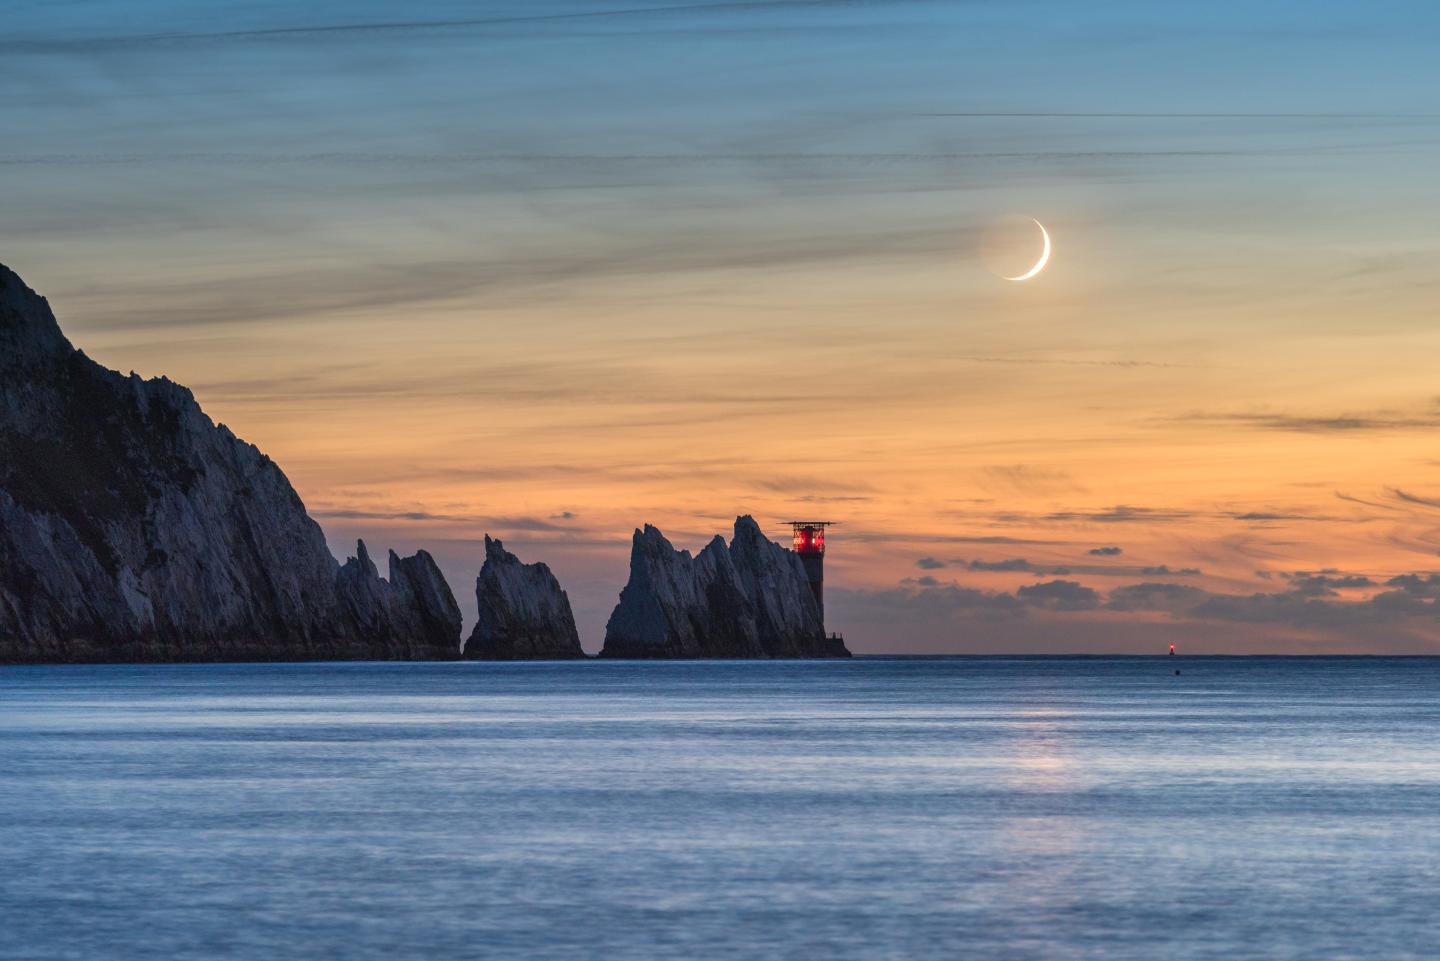 Crescent Moon at sunset with mountains in the background and sea in the foreground